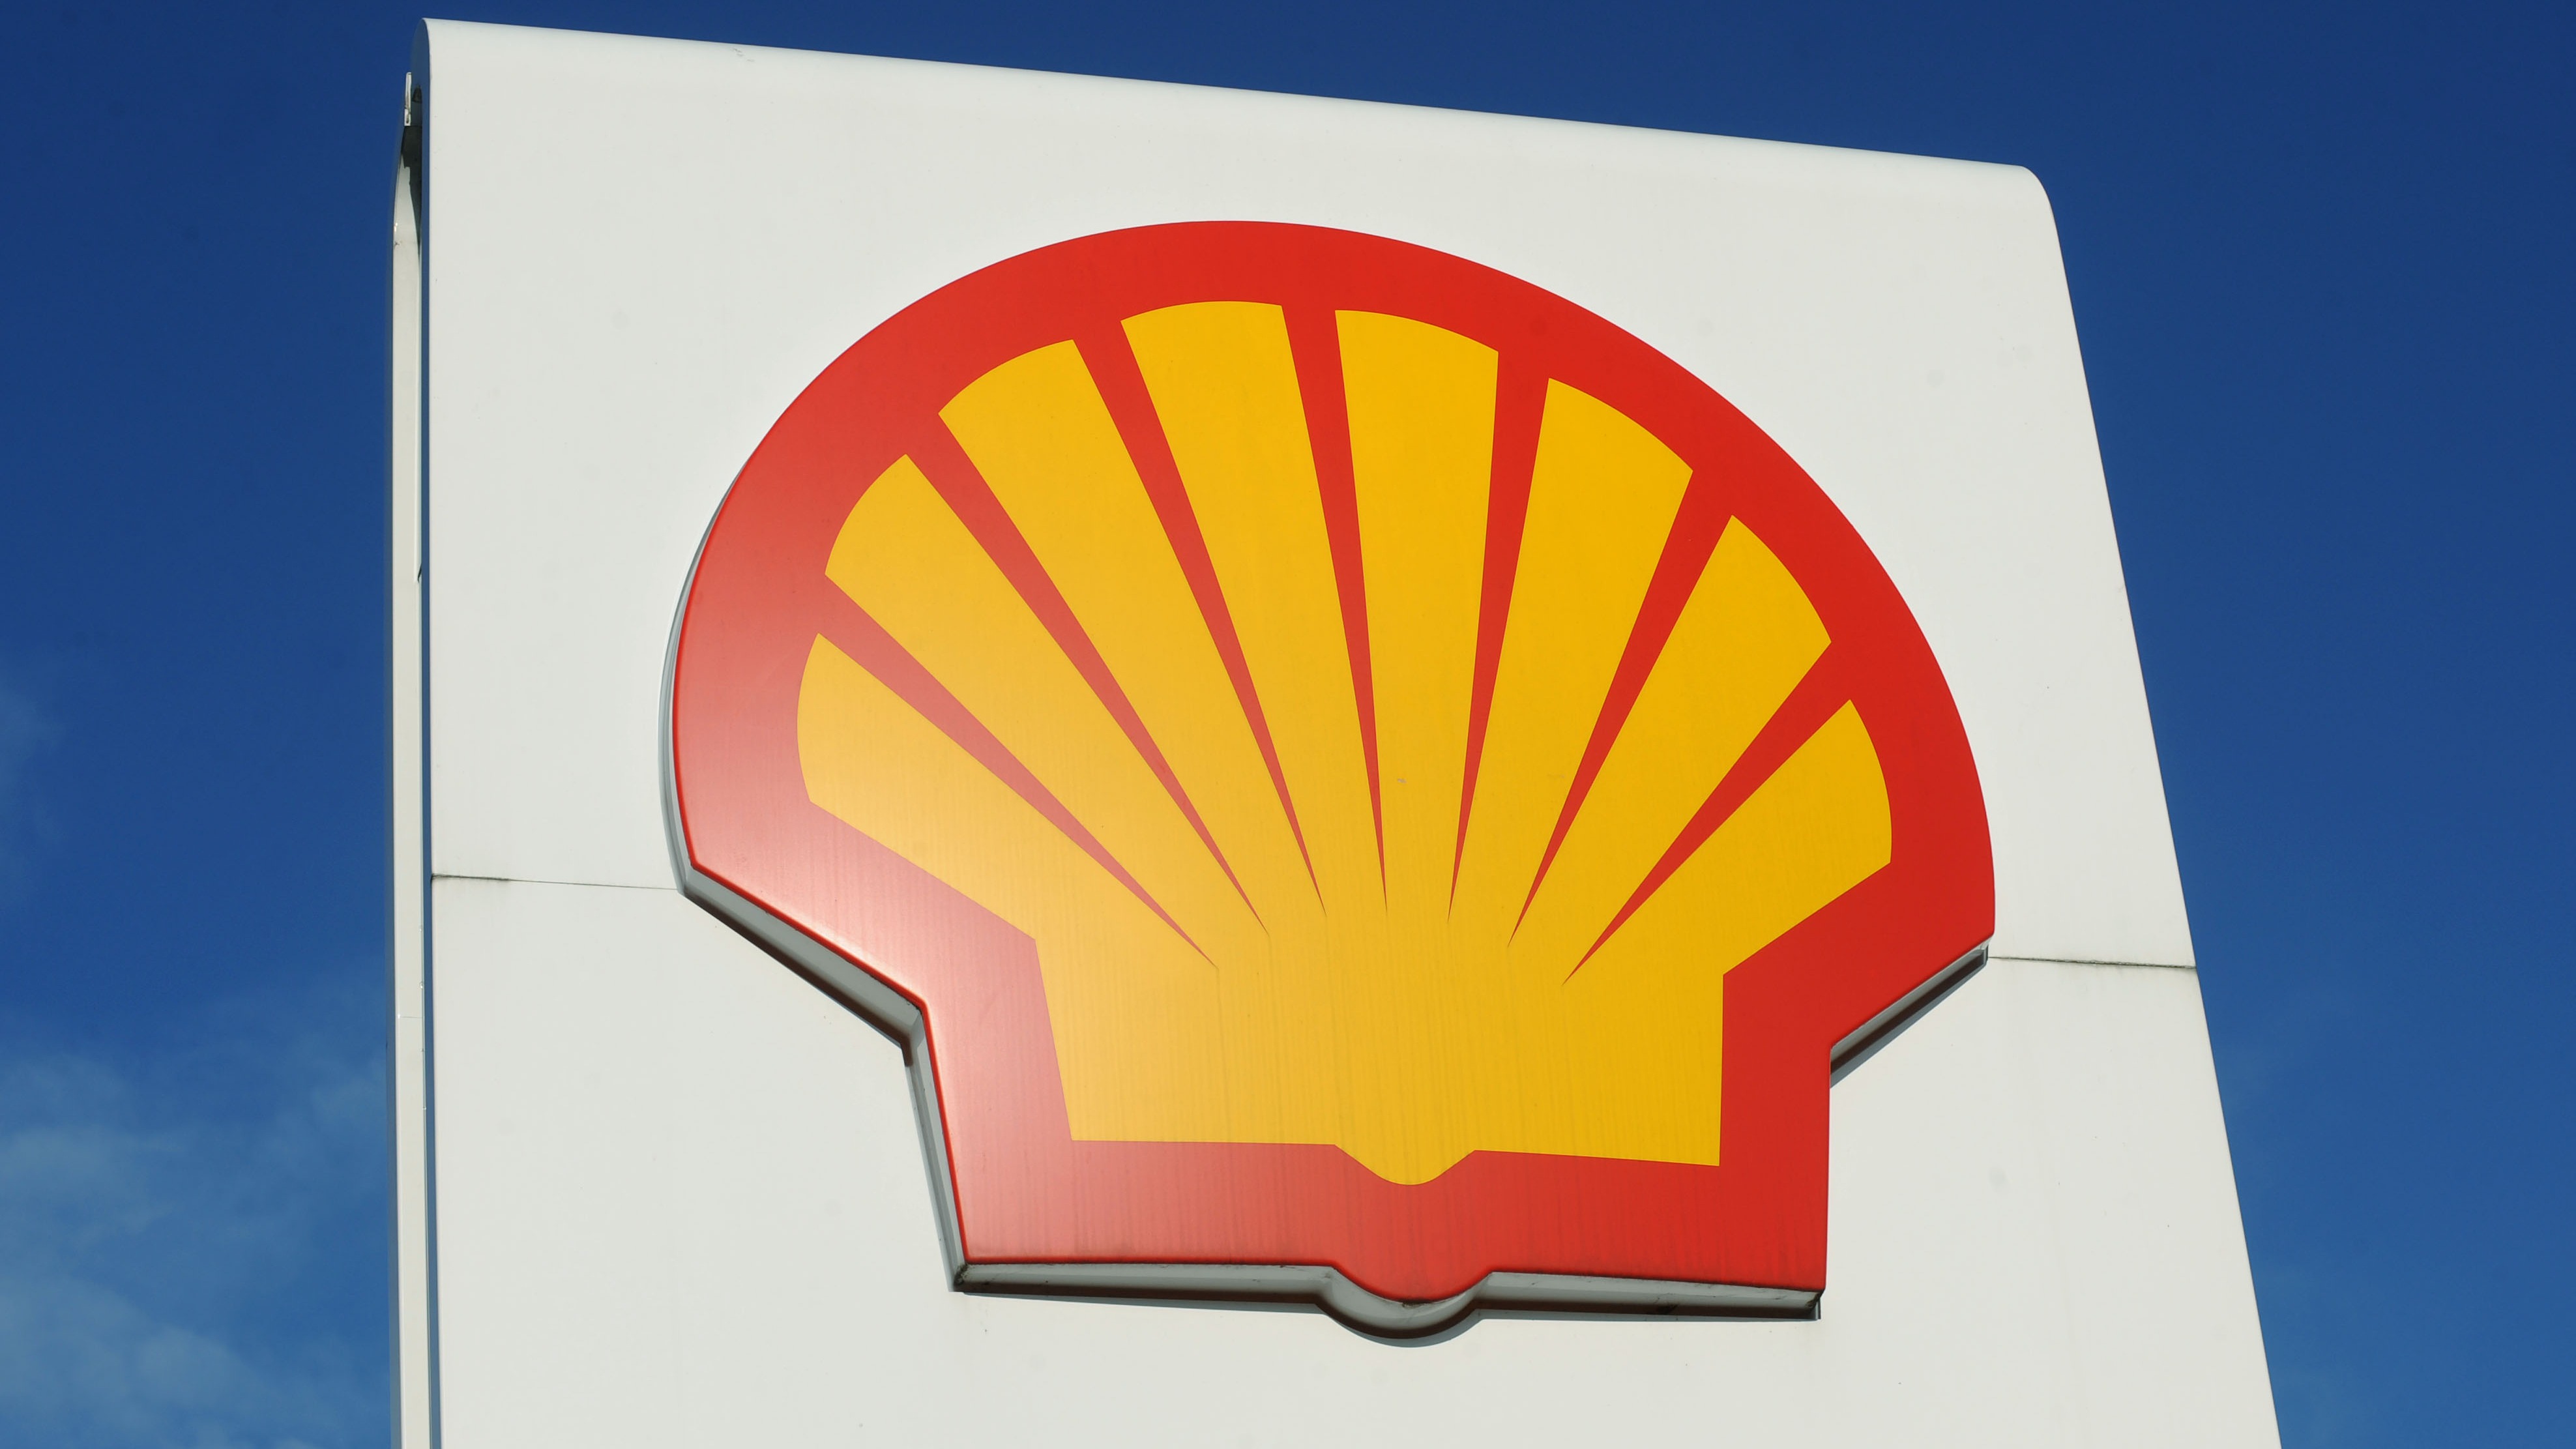 Watchdog bans Shell’s ‘misleading’ low-carbon adverts